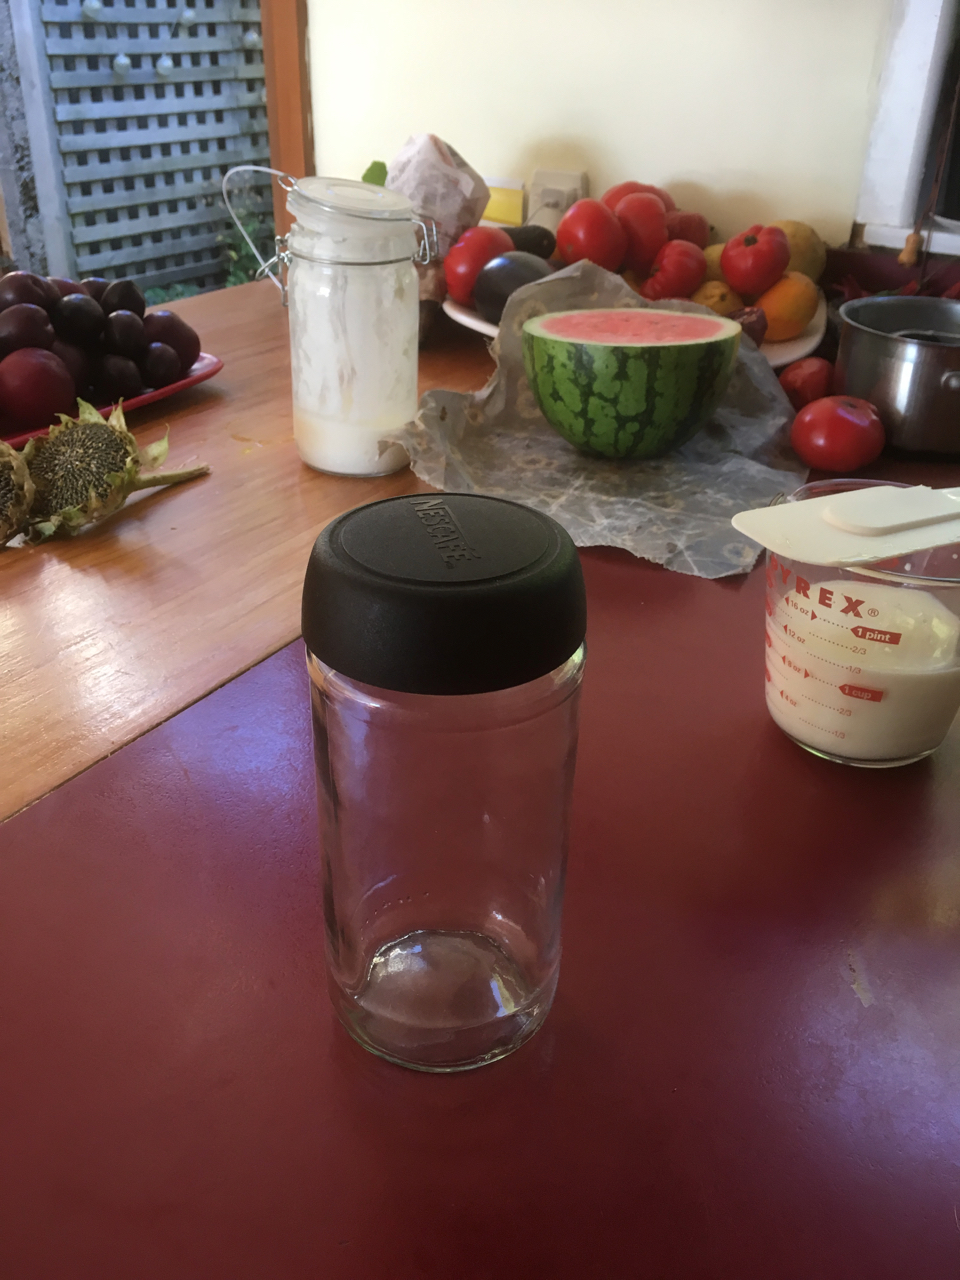 An clean unlabelled glass jar with a plastic lid sitting on a kitchen bench. There are various fruits in bowls behind it. Directly behind the empty jar there is a glass jar which contains yoghurt. It is nearly empty. To the right there is a 500ml jug which is half full of milk.